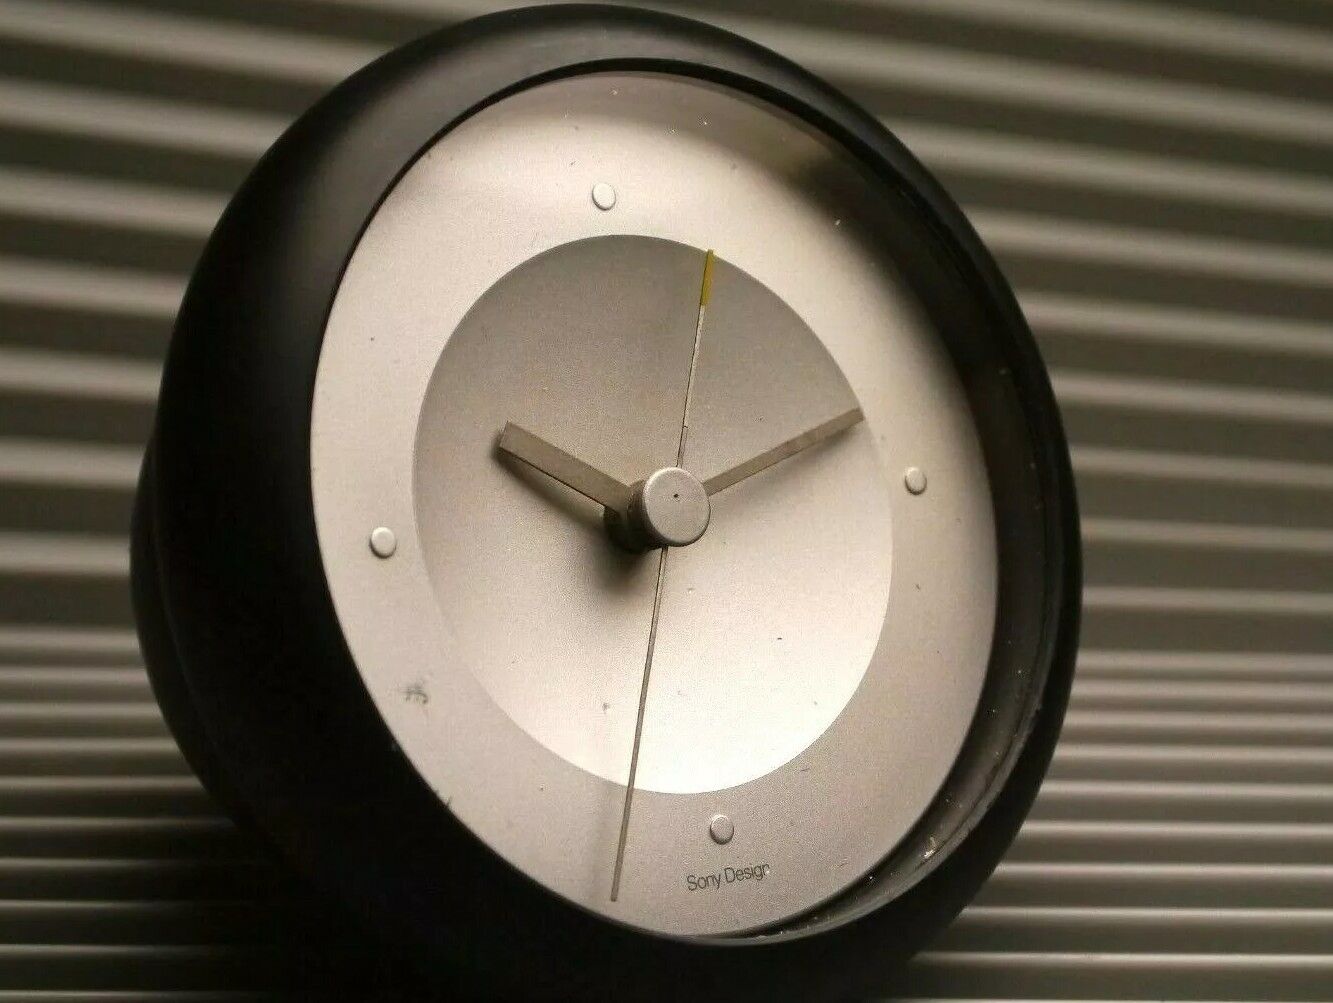 extremely rare Sony Design massive analogue clock  made in Japan 80-90s